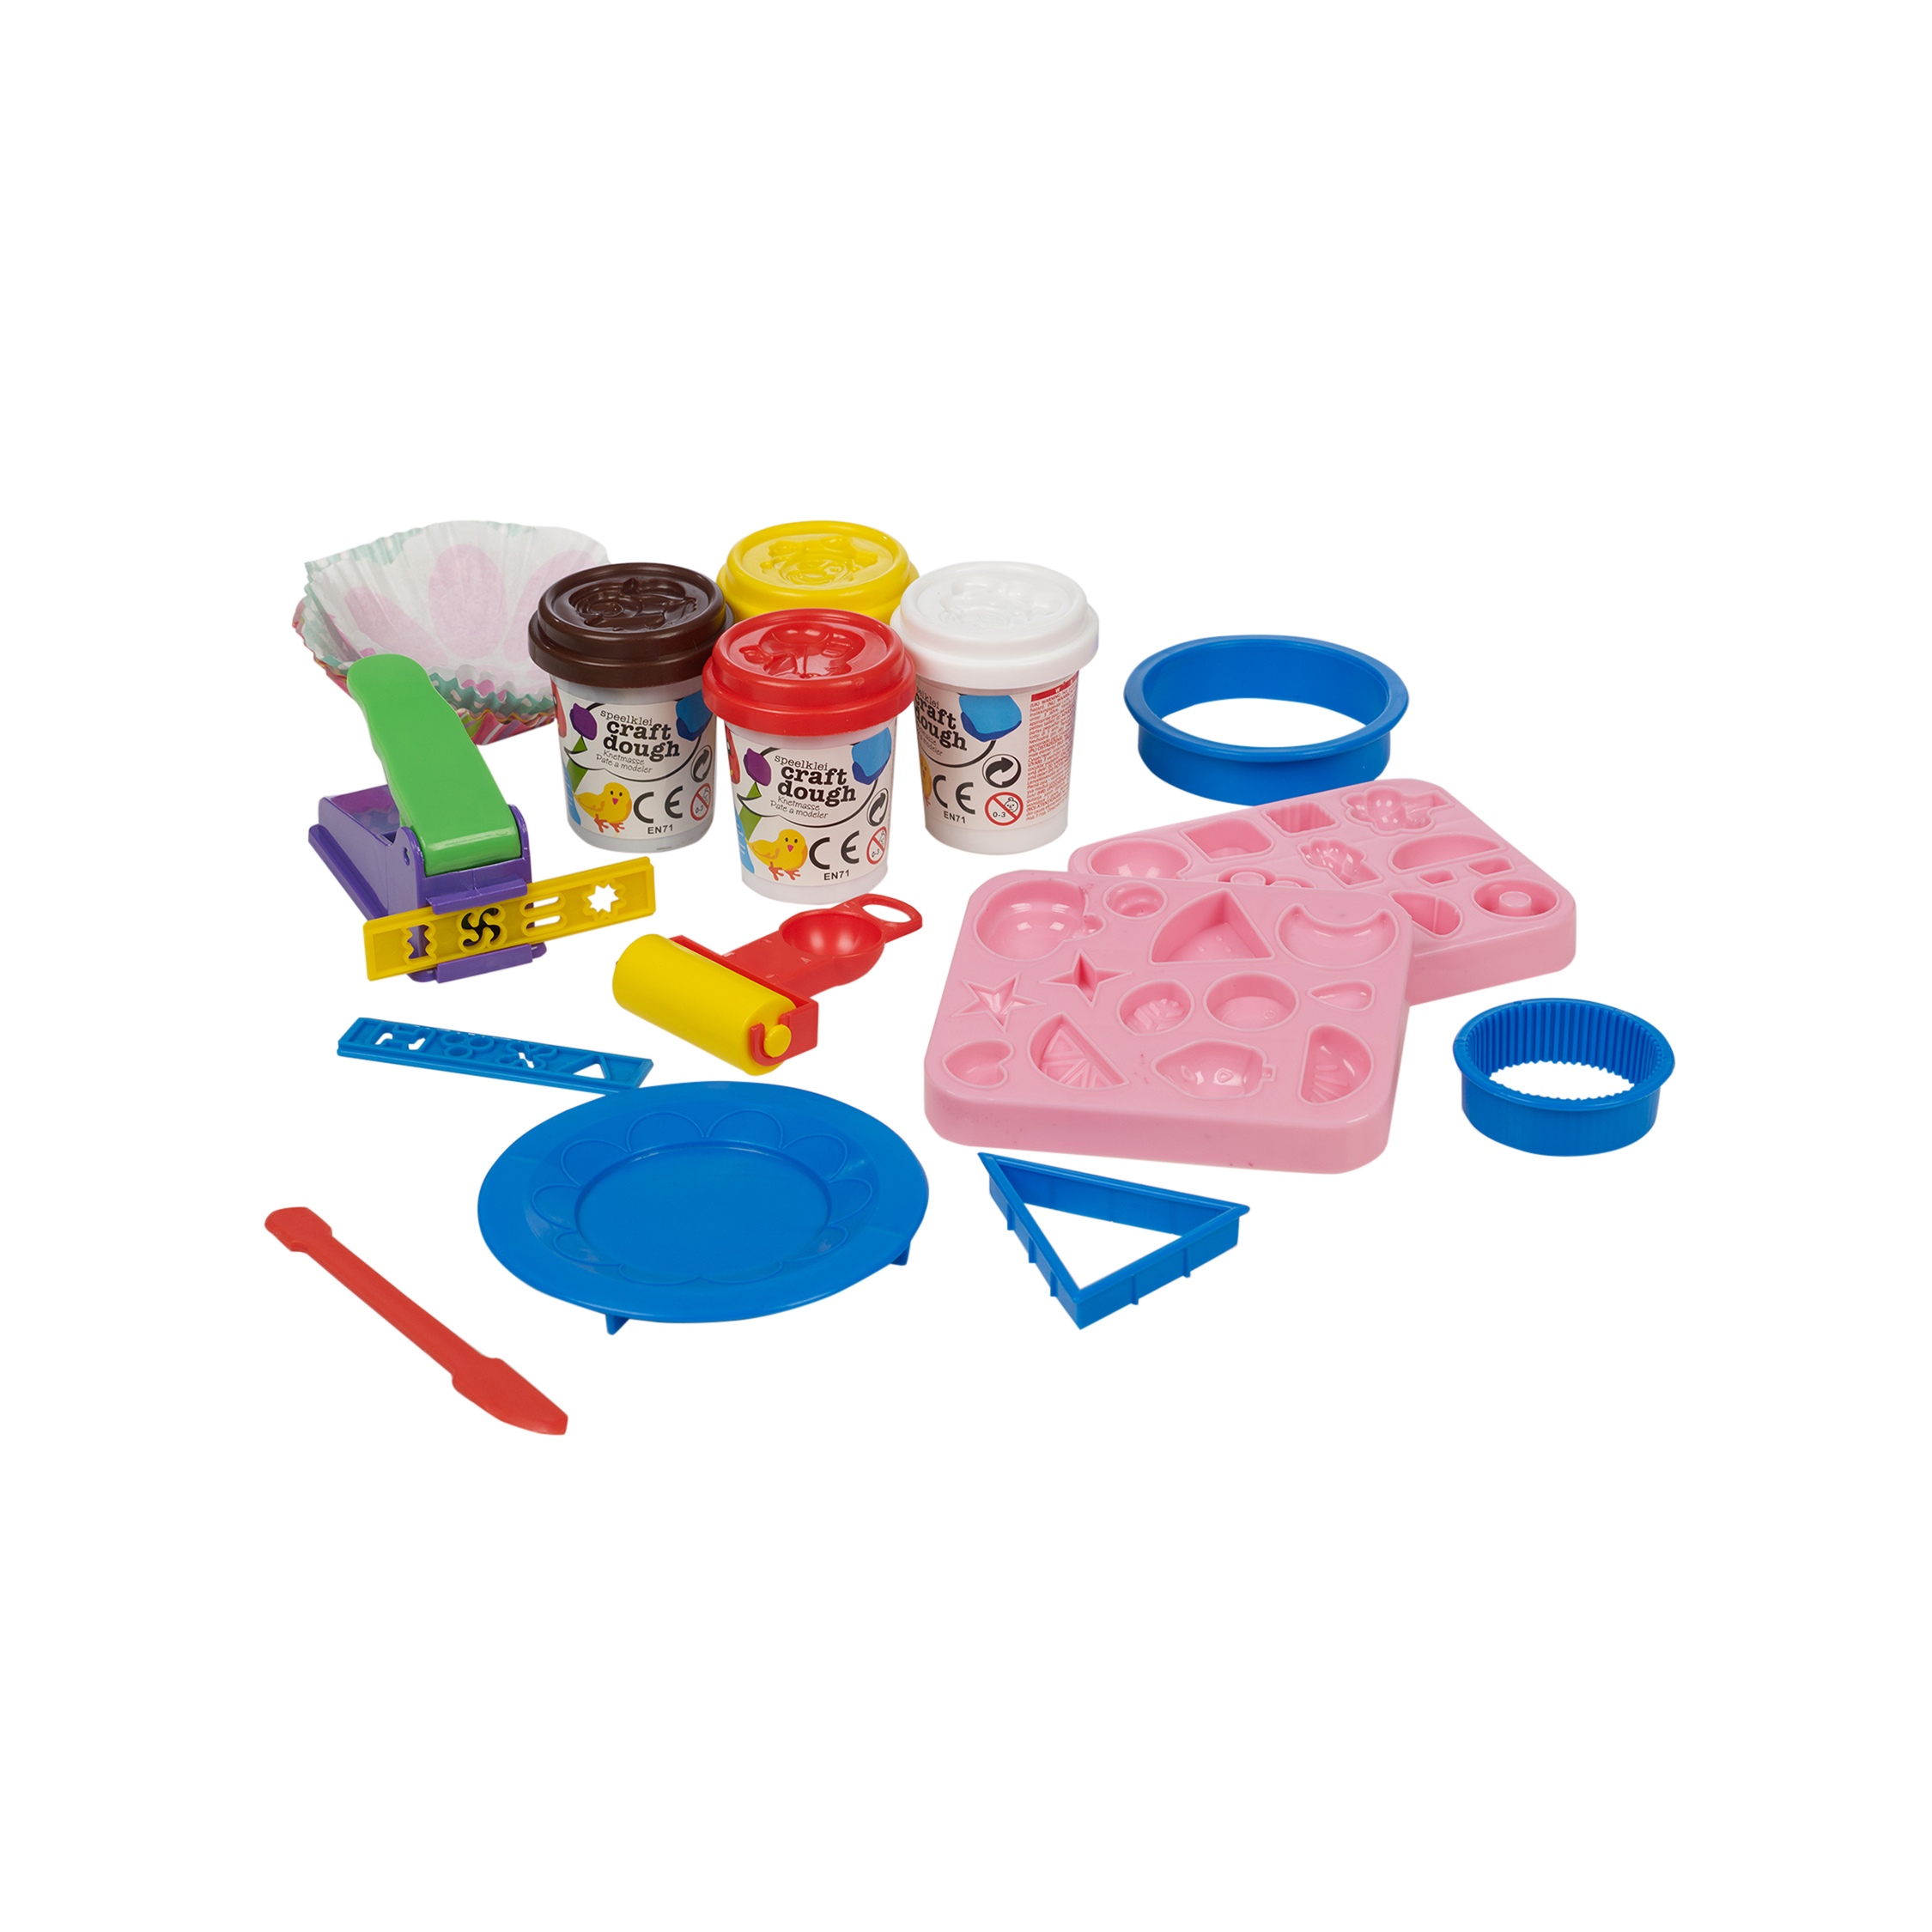 Cake Modelling Play Dough 19pc Kit Tools Accessories Set 4 Tubs Craft ...